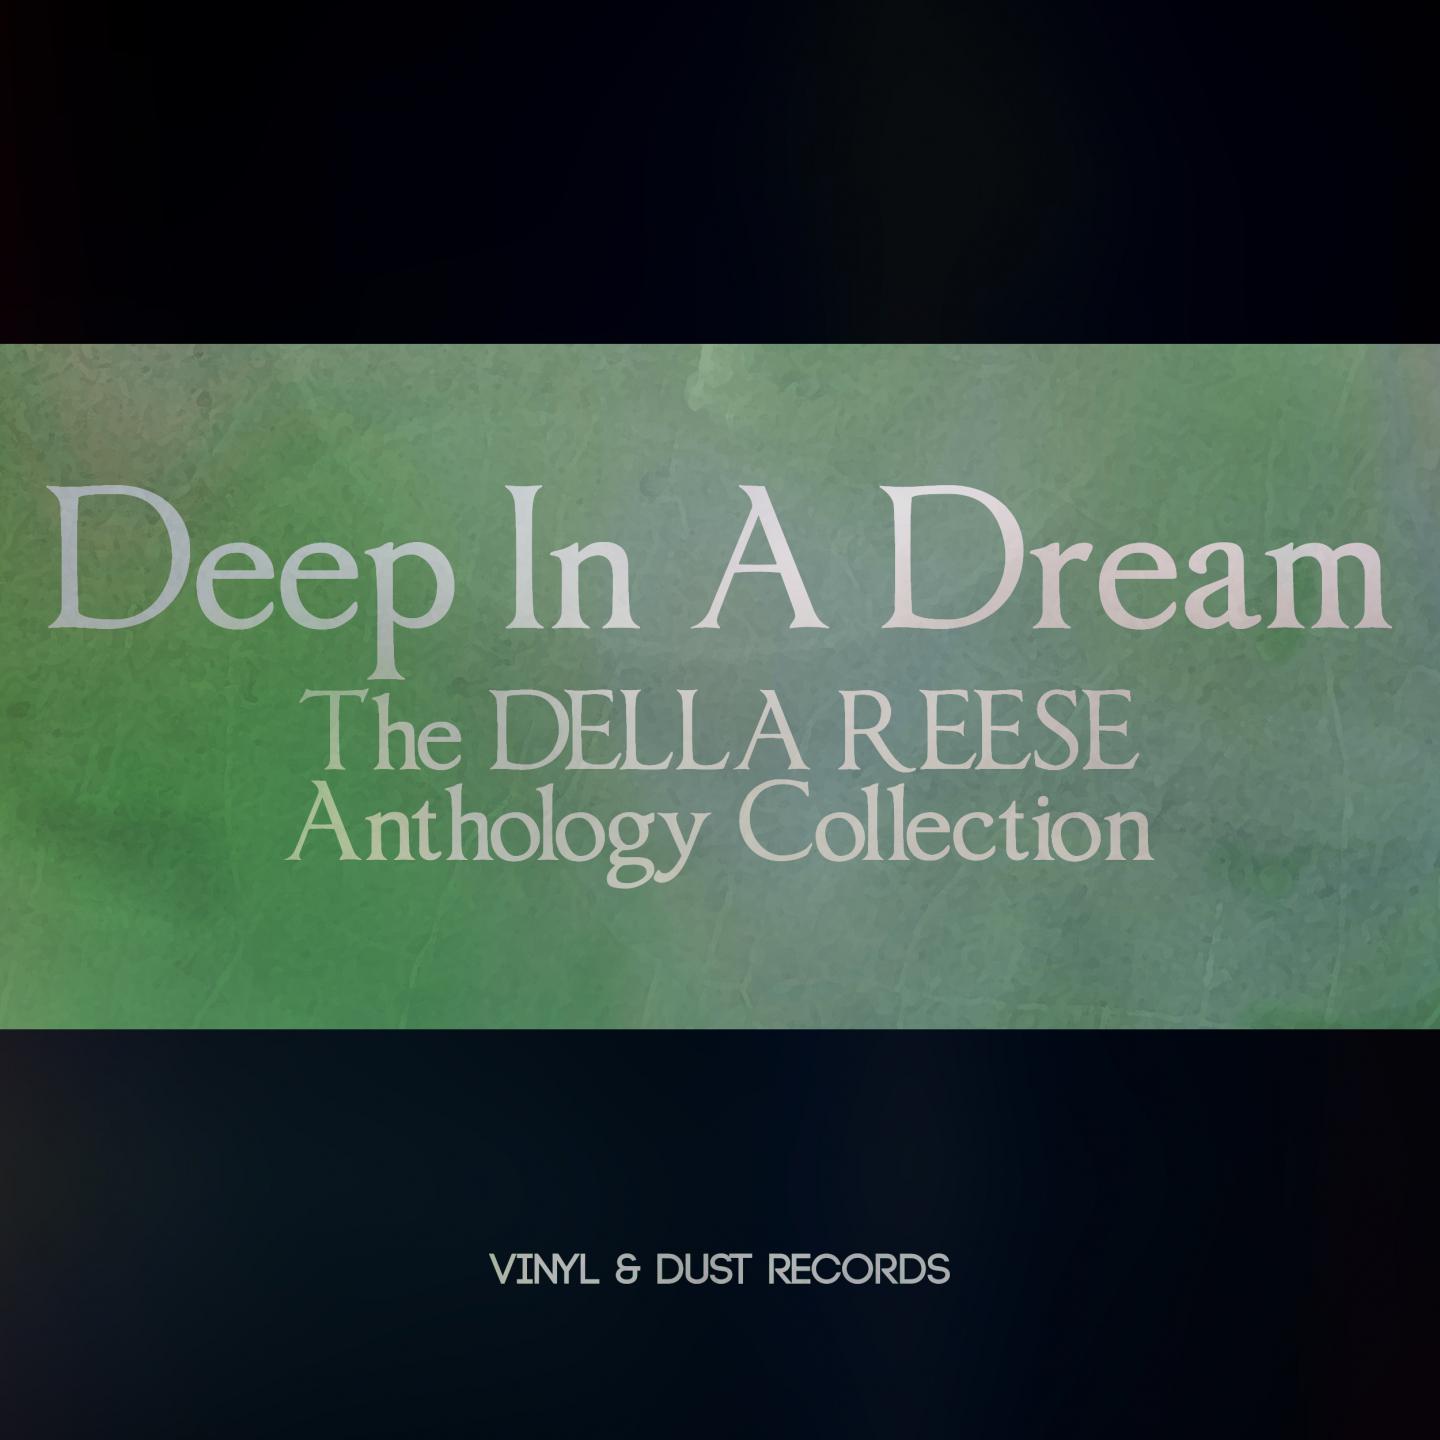 Deep in a Dream (The Della Reese Anthology Collection)